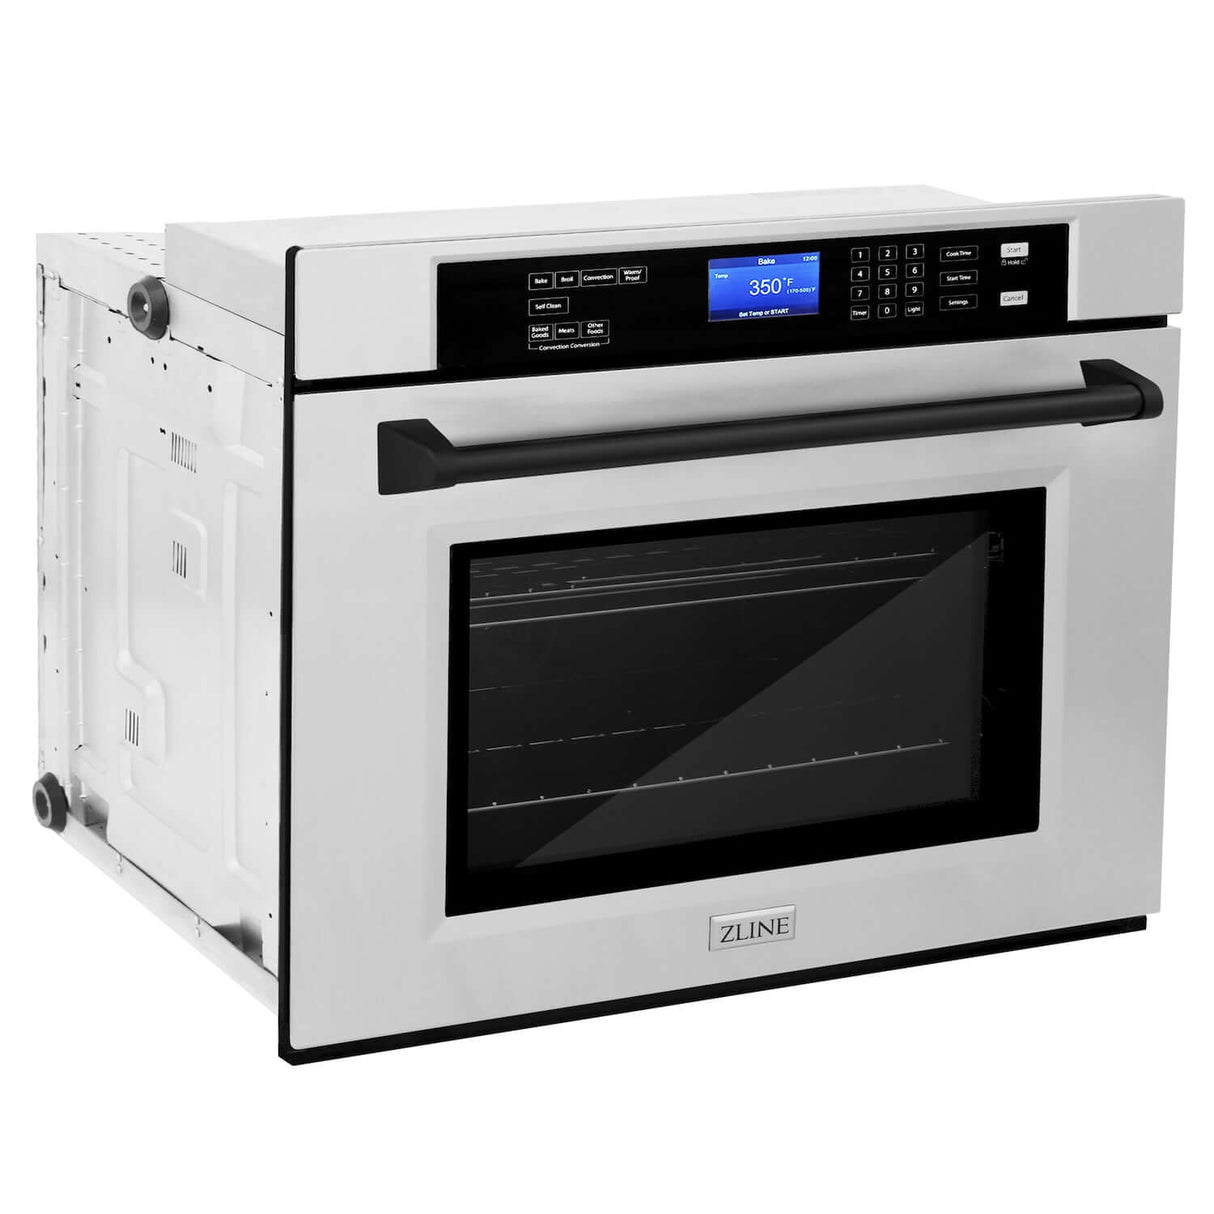 ZLINE Autograph Edition 30 in. Electric Single Wall Oven with Self Clean and True Convection in Stainless Steel and Matte Black Accents (AWSZ-30-MB)